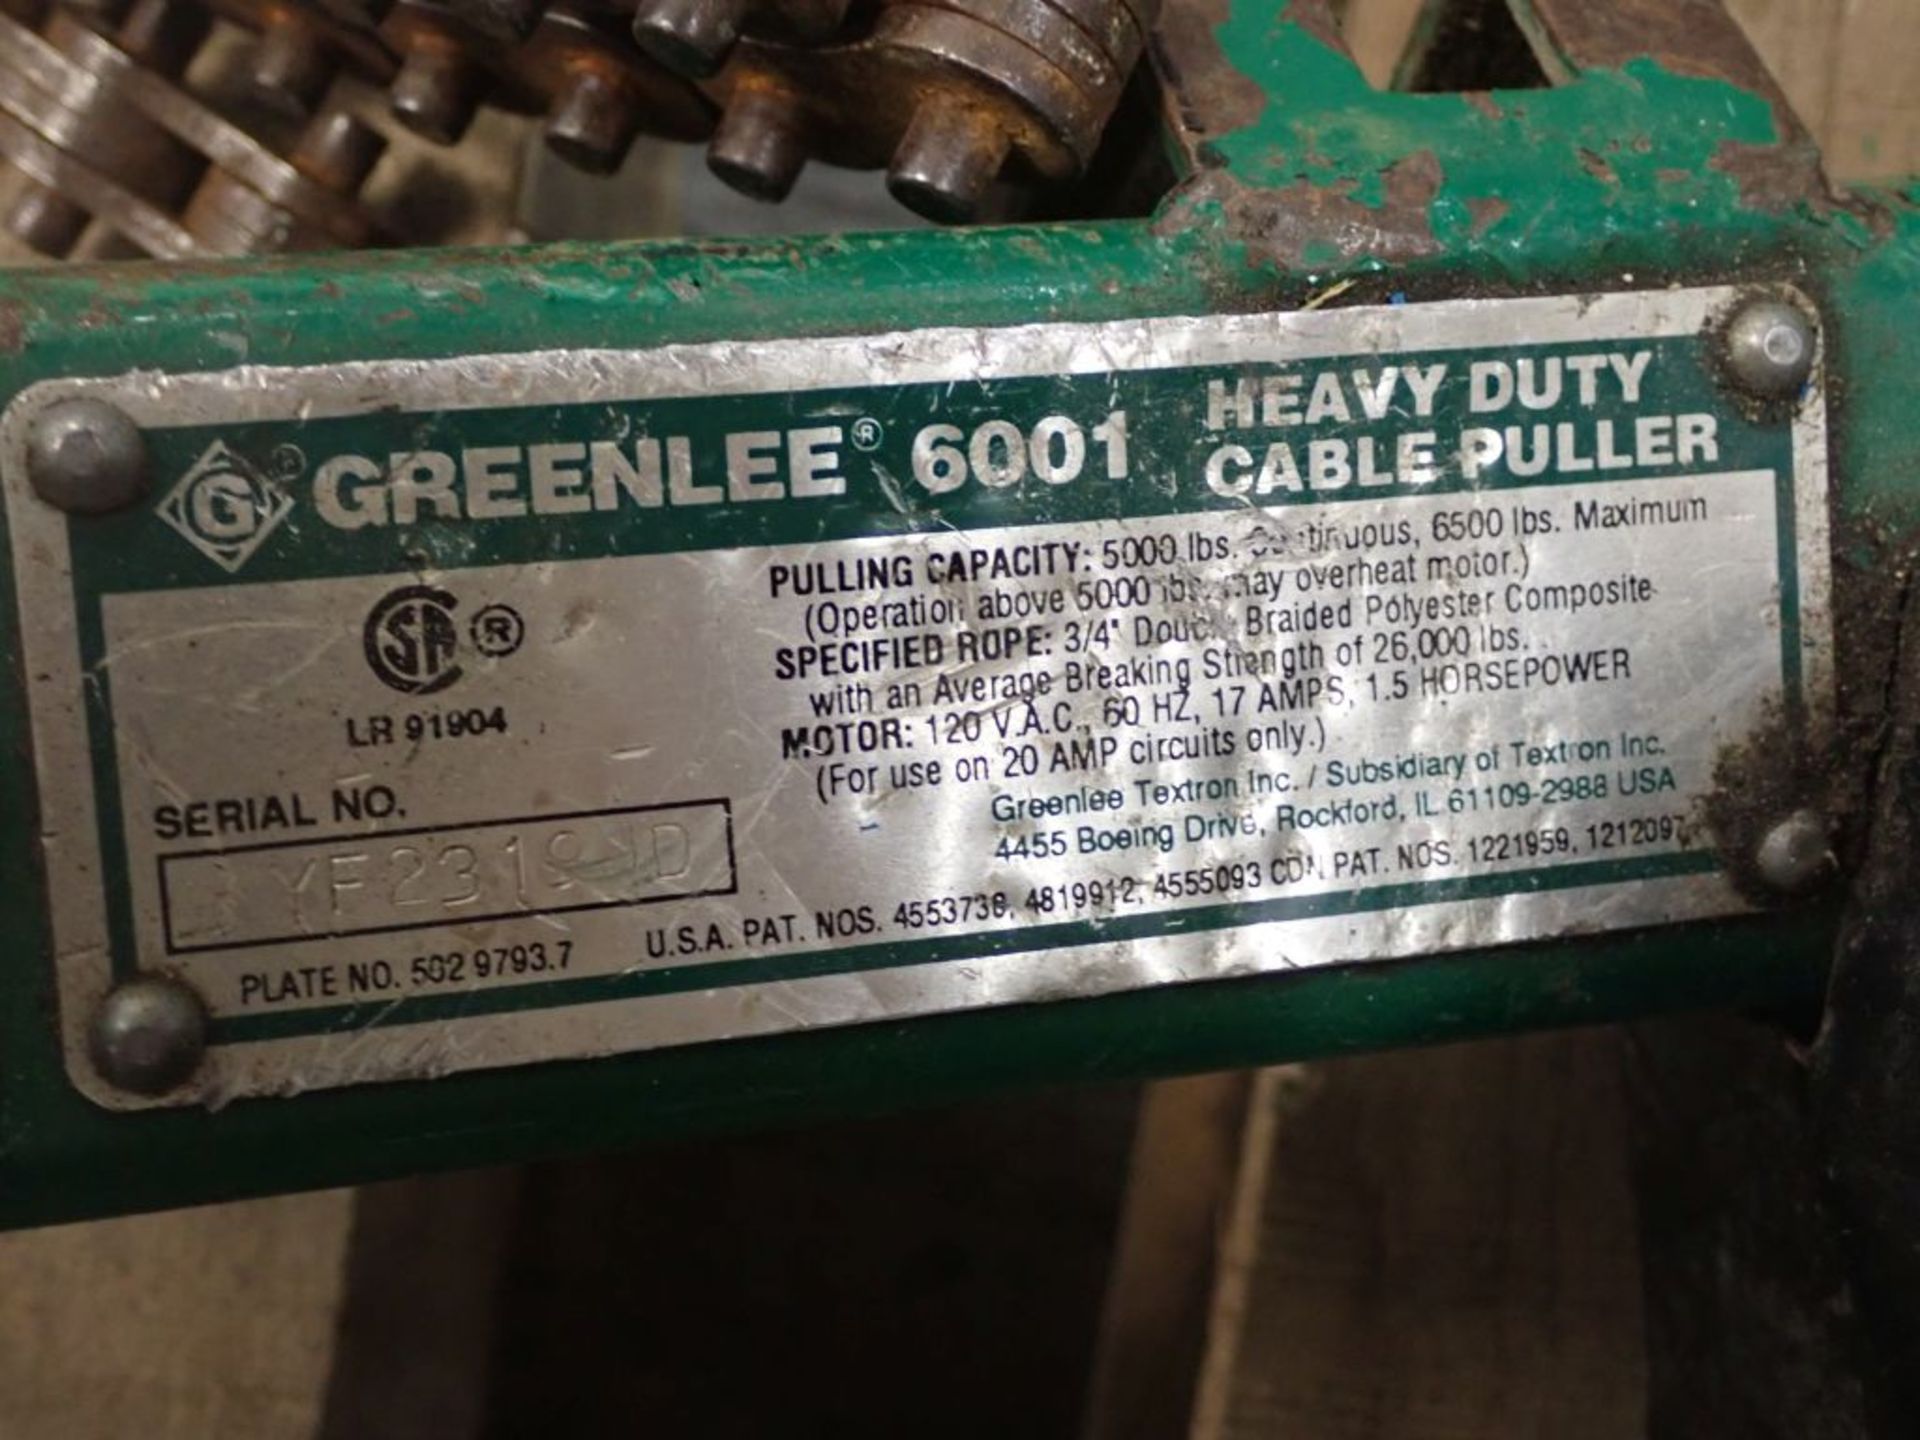 Greenlee Cable Puller 6001 - Image 7 of 14